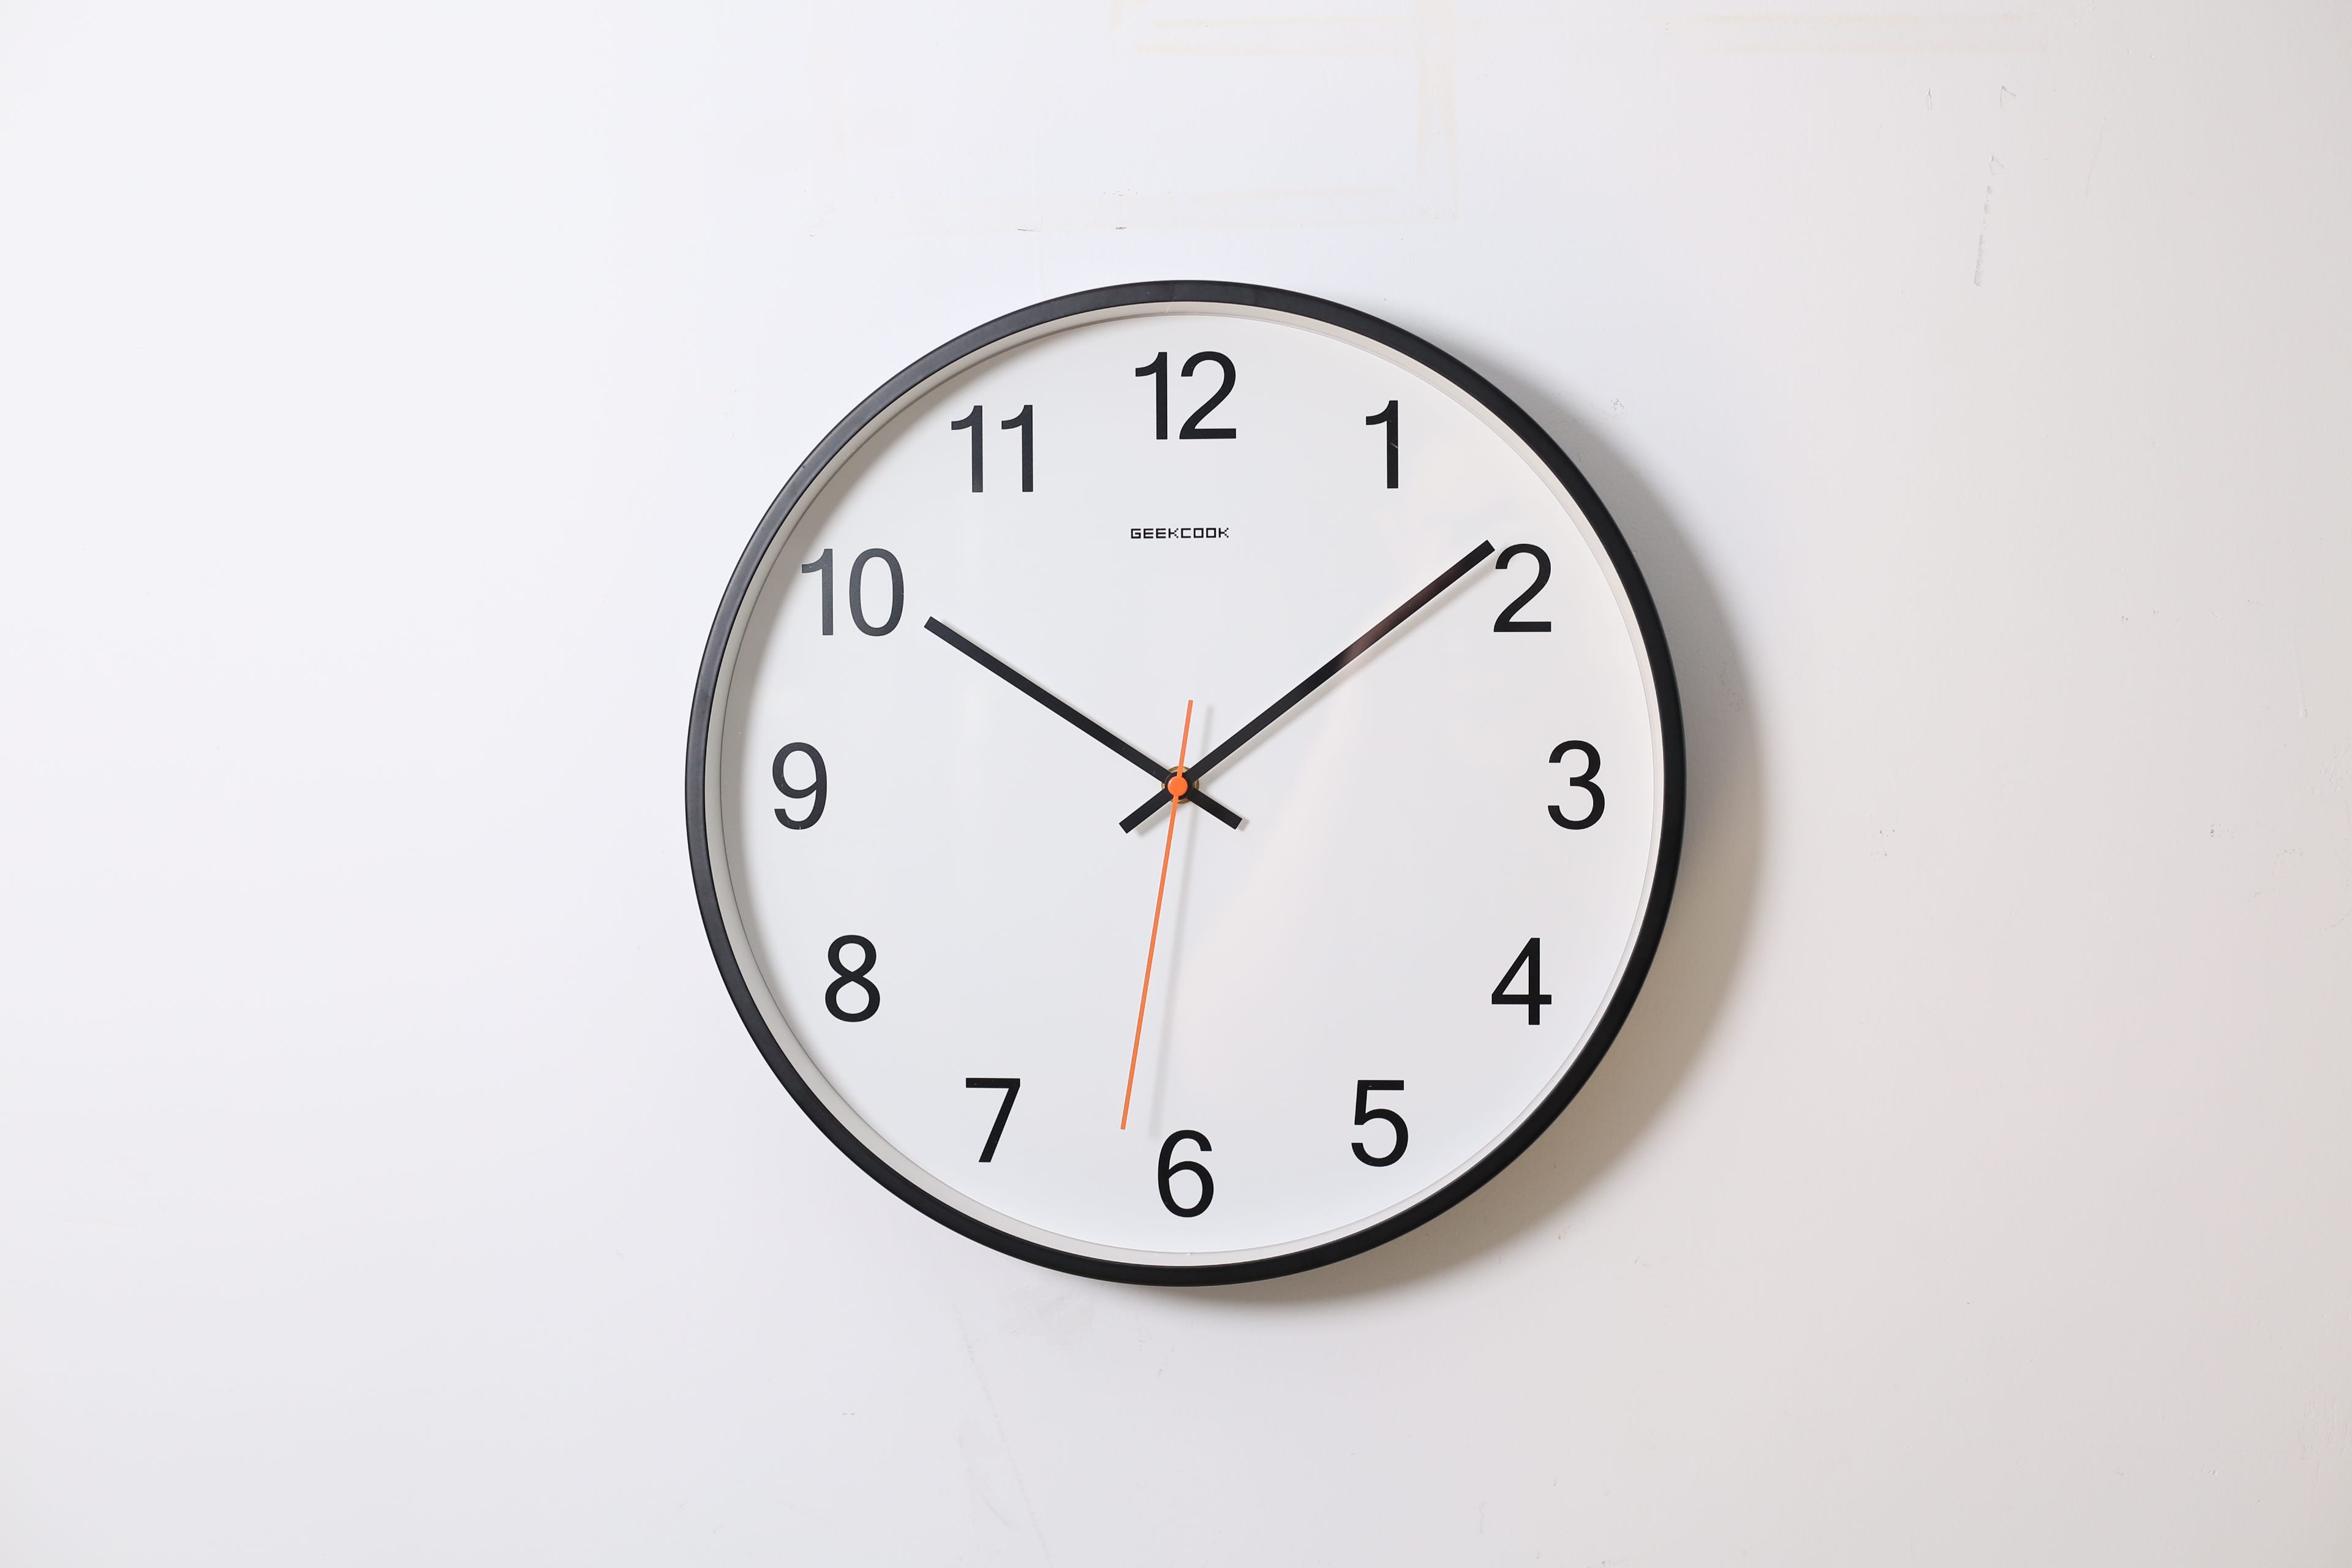 Knowledge Zone | Did you know why all clocks show the time 10.10 initially?